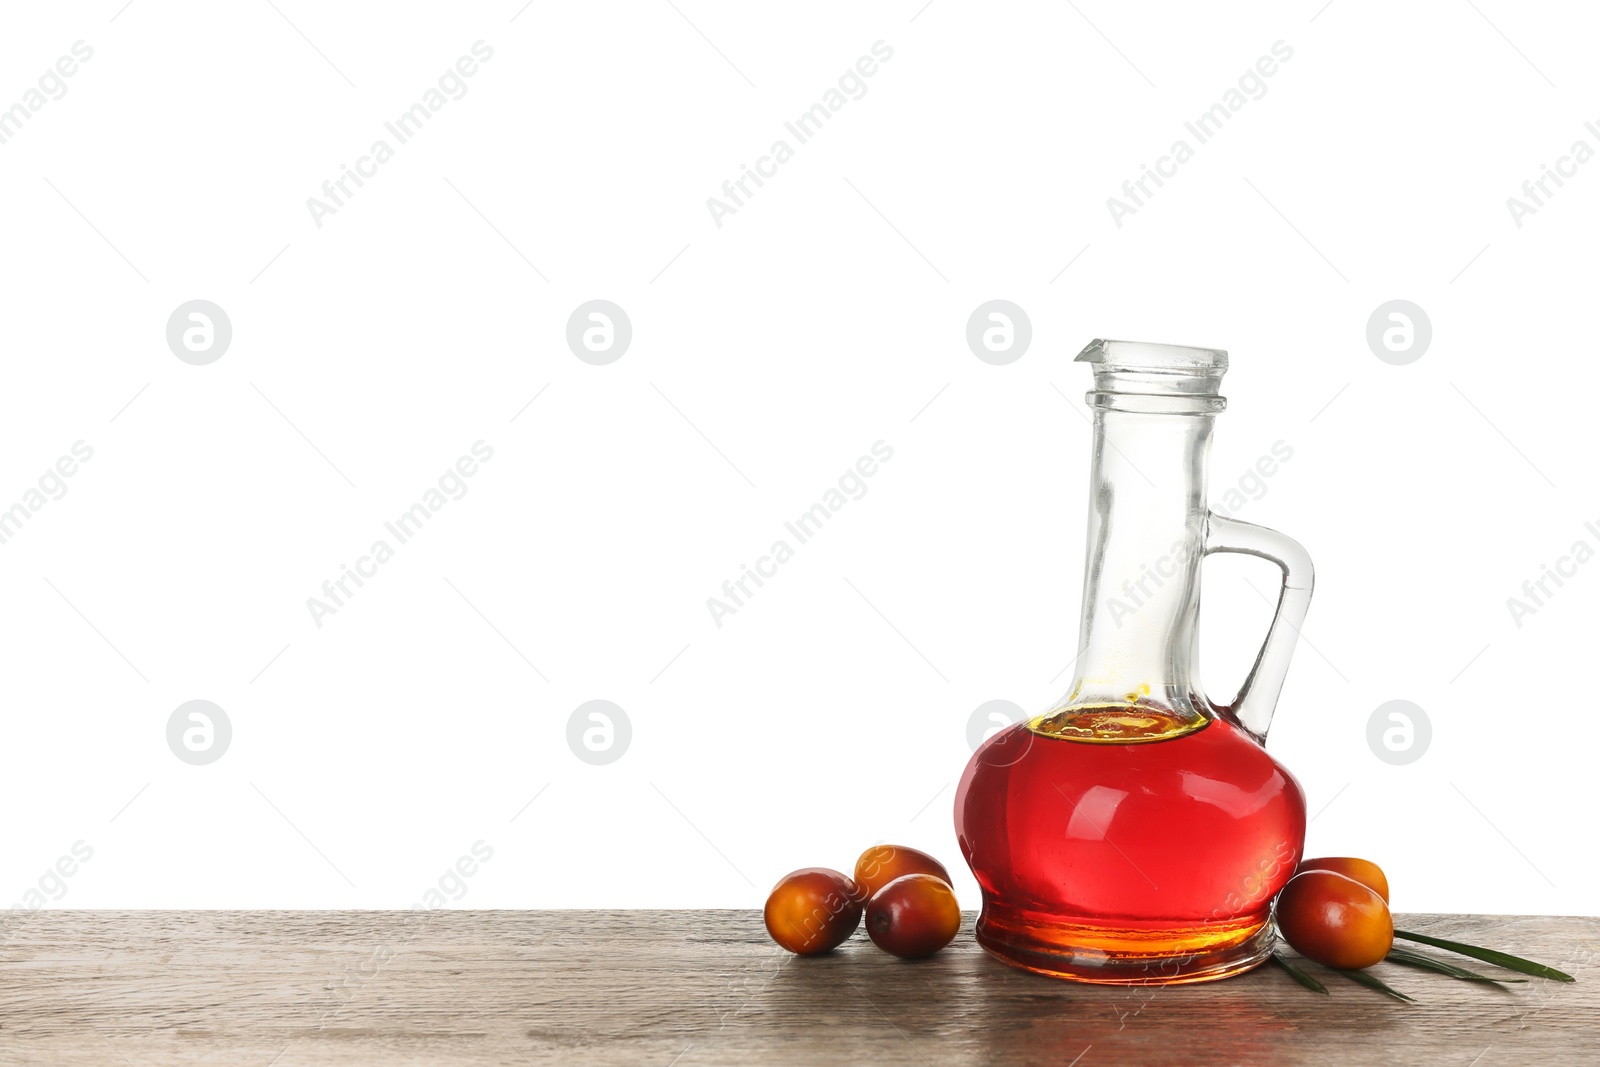 Image of Palm oil, tropical leaf and fruits on wooden table against white background